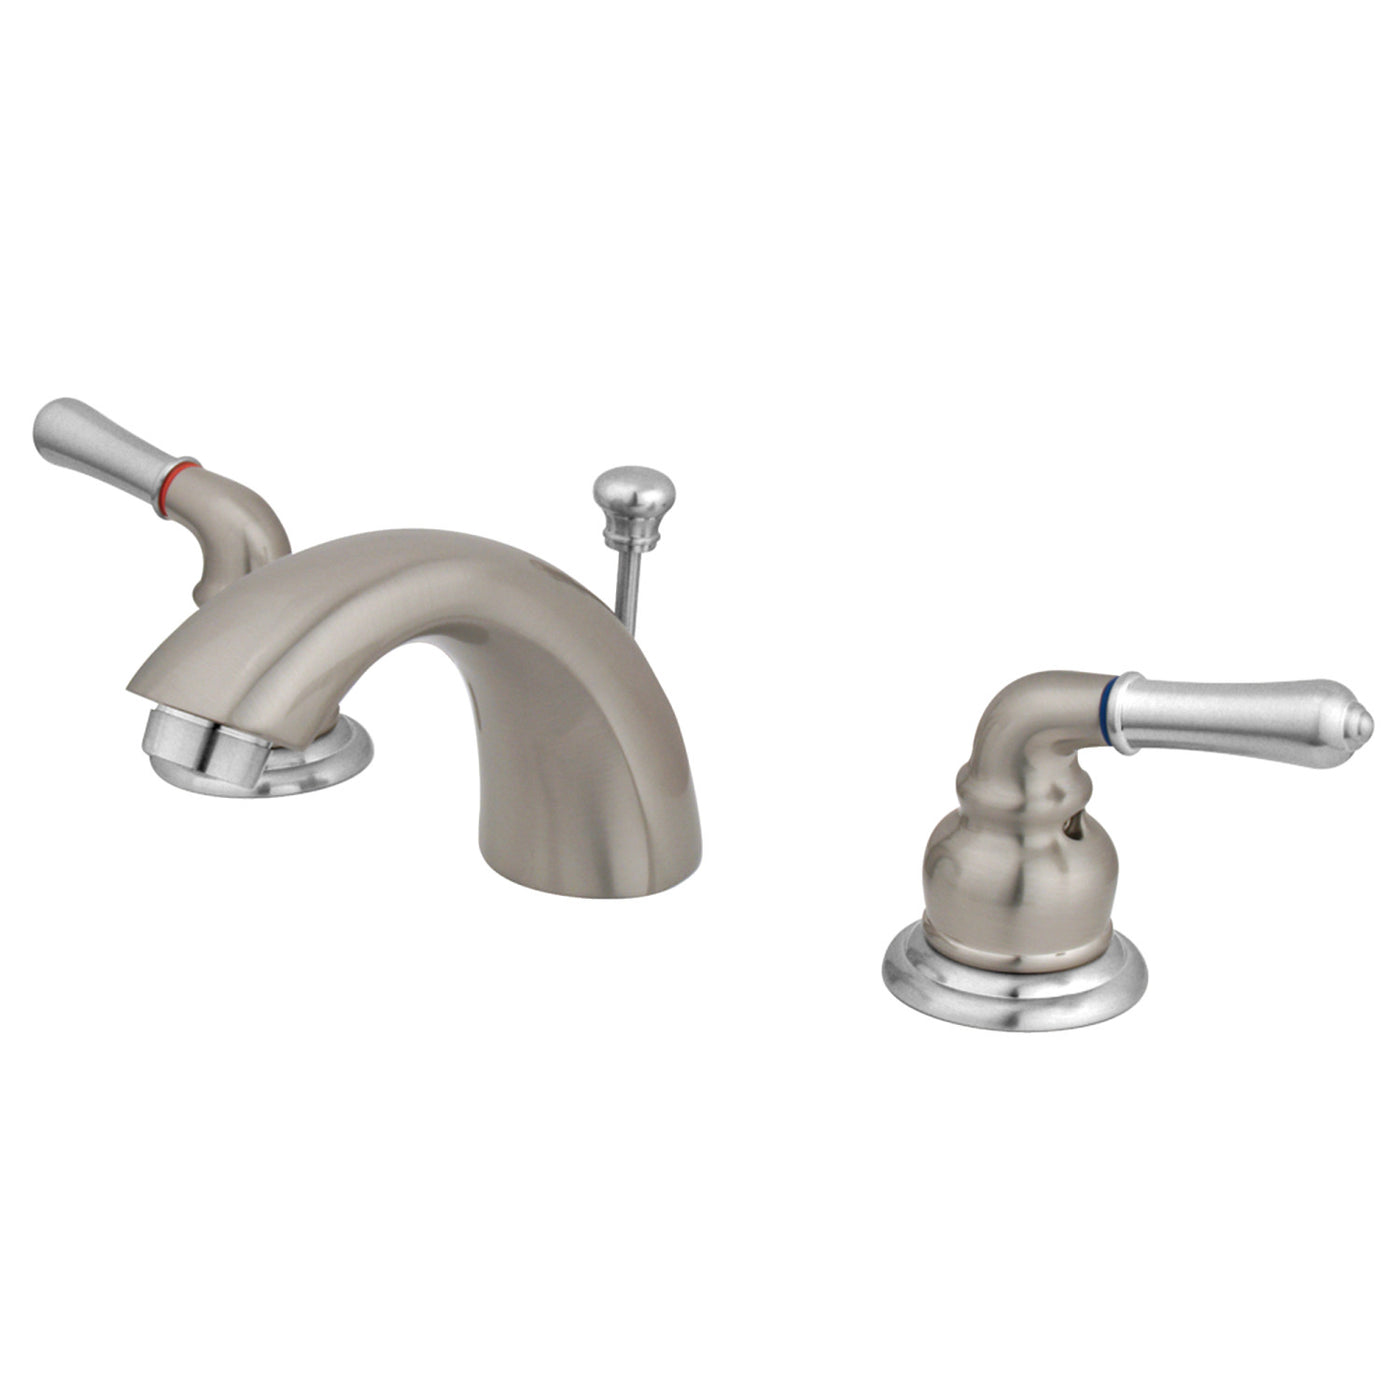 Elements of Design EB957 Mini-Widespread Bathroom Faucet, Brushed Nickel/Polished Chrome